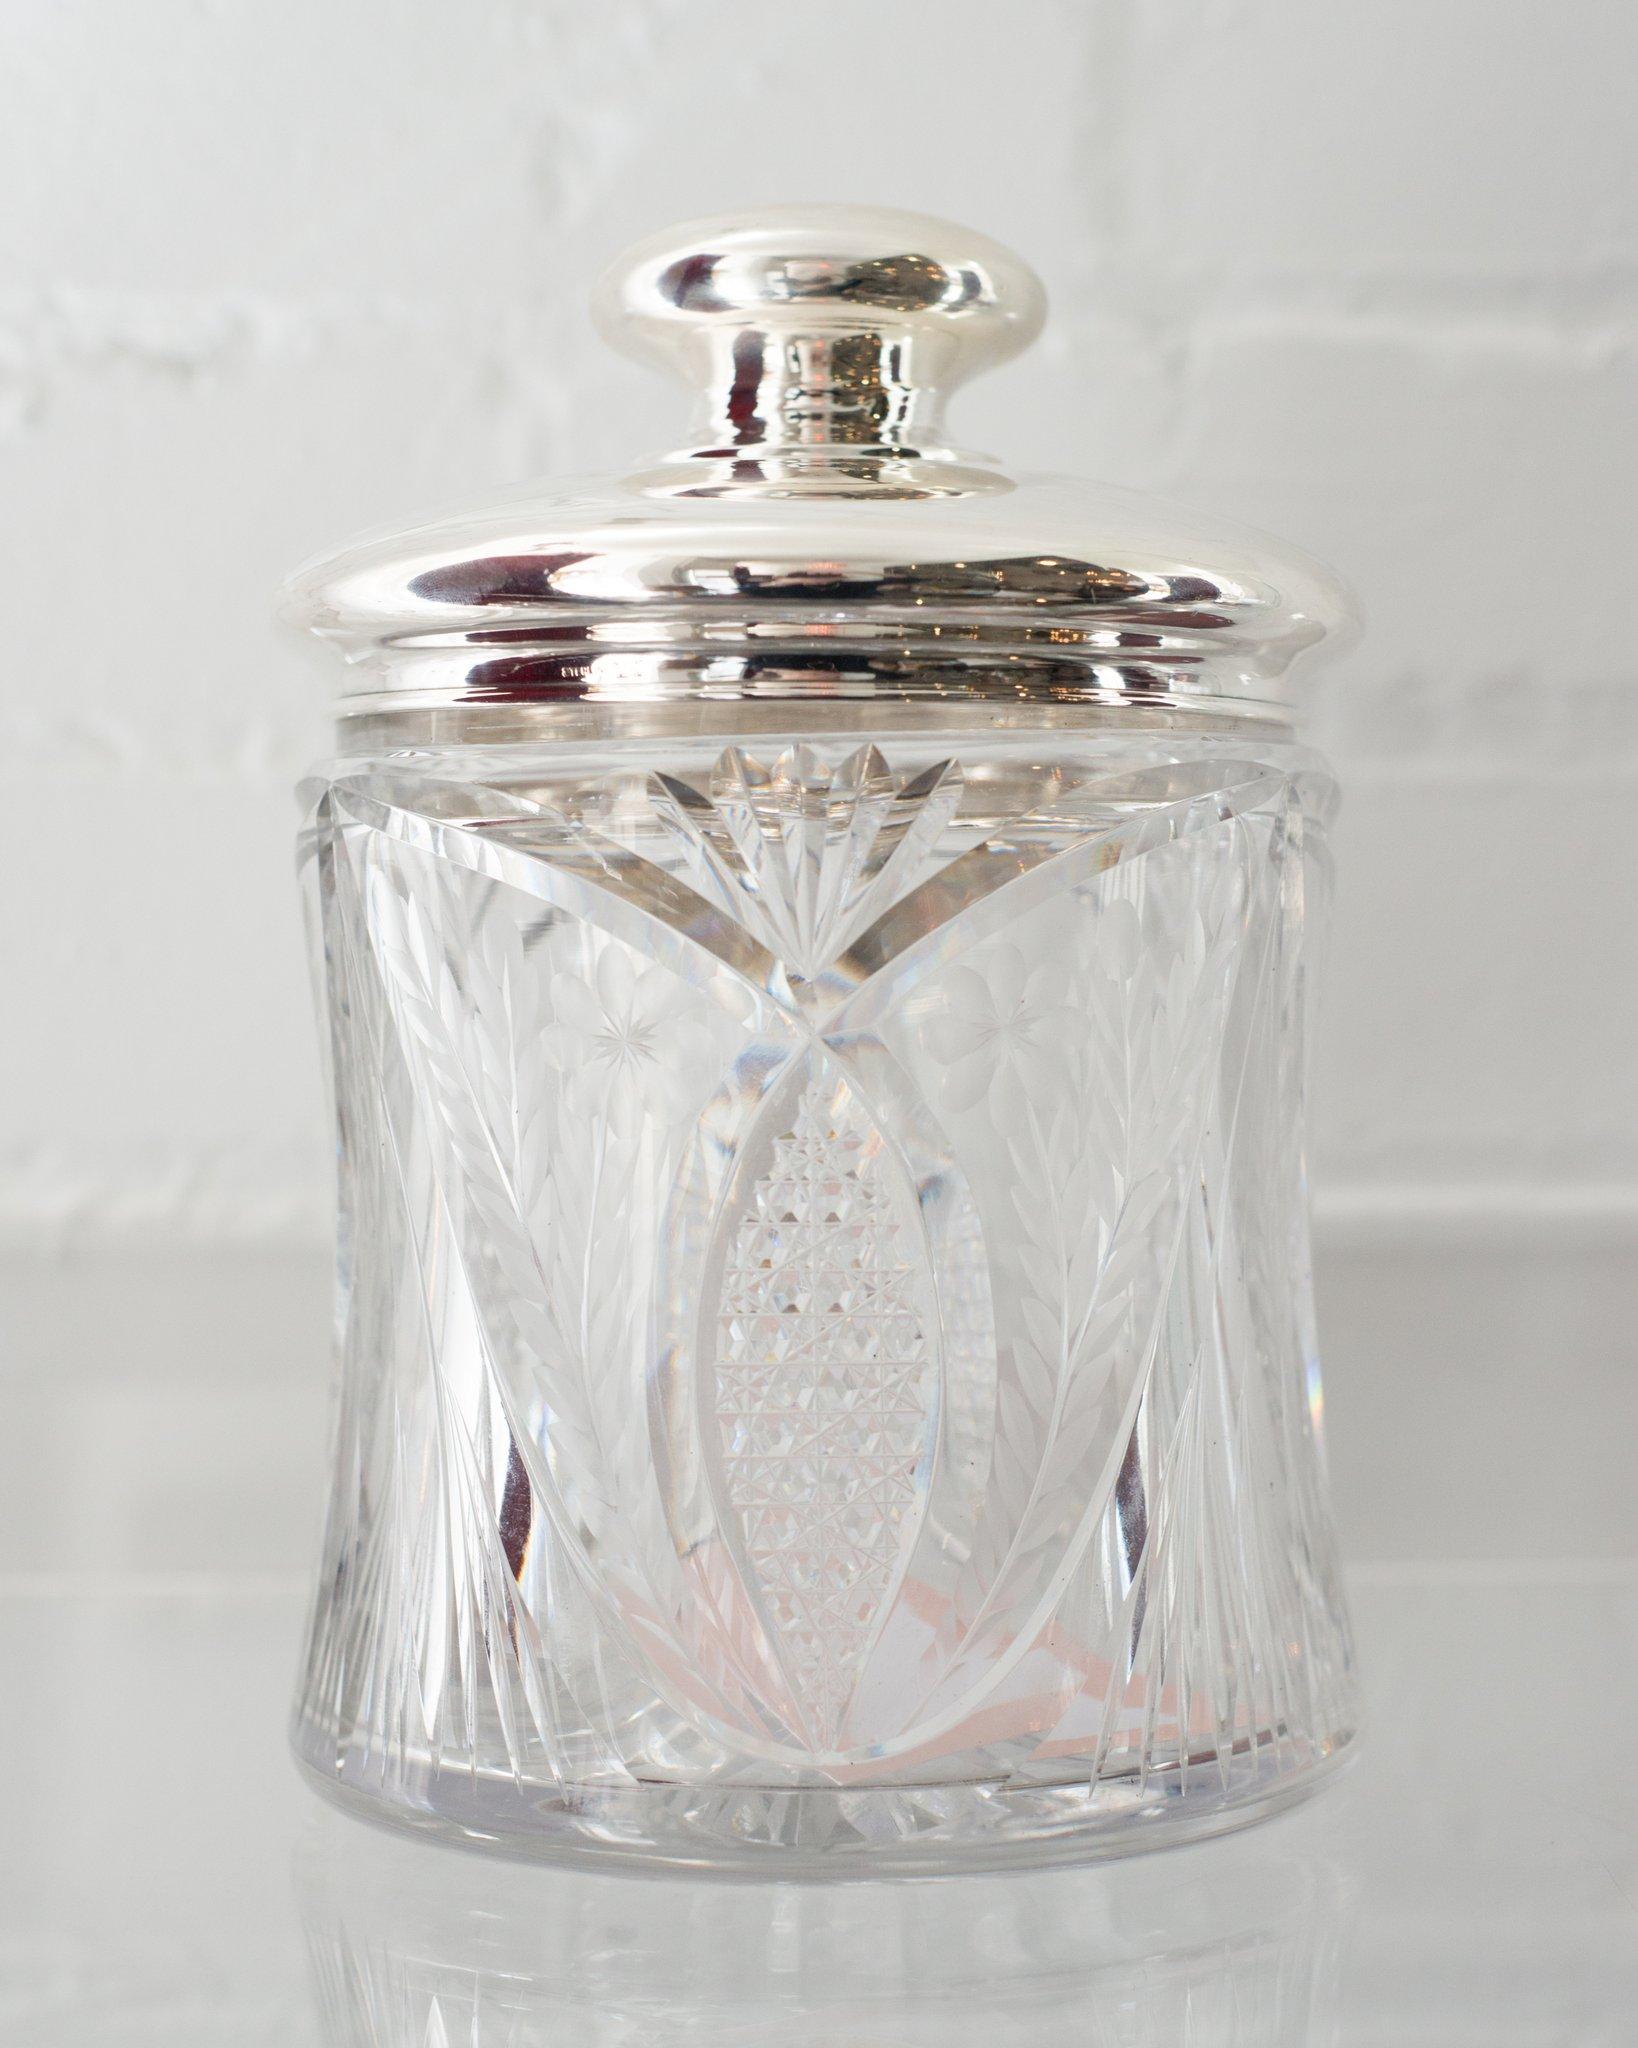 This stunning antique cut crystal jar with a sterling silver lid is an elegant vessel to hold your favourite treats. Our clients are always asking how they can incorporate antiques into their home. We always encourage them to utilize Antiques in